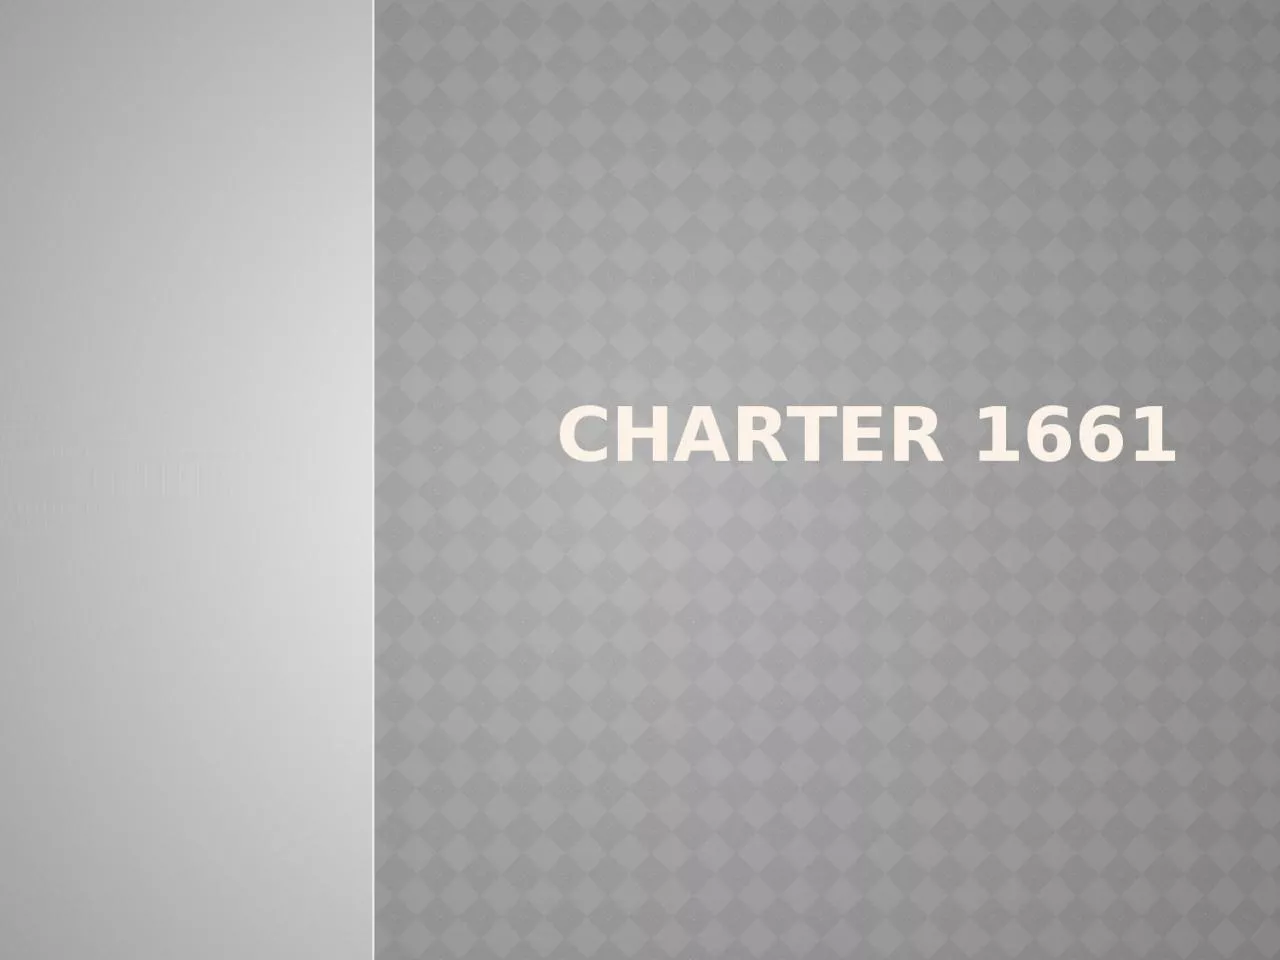 CHARTER 1661 CHARTER OF 1661 GRANTED BY KING CHARLES II.